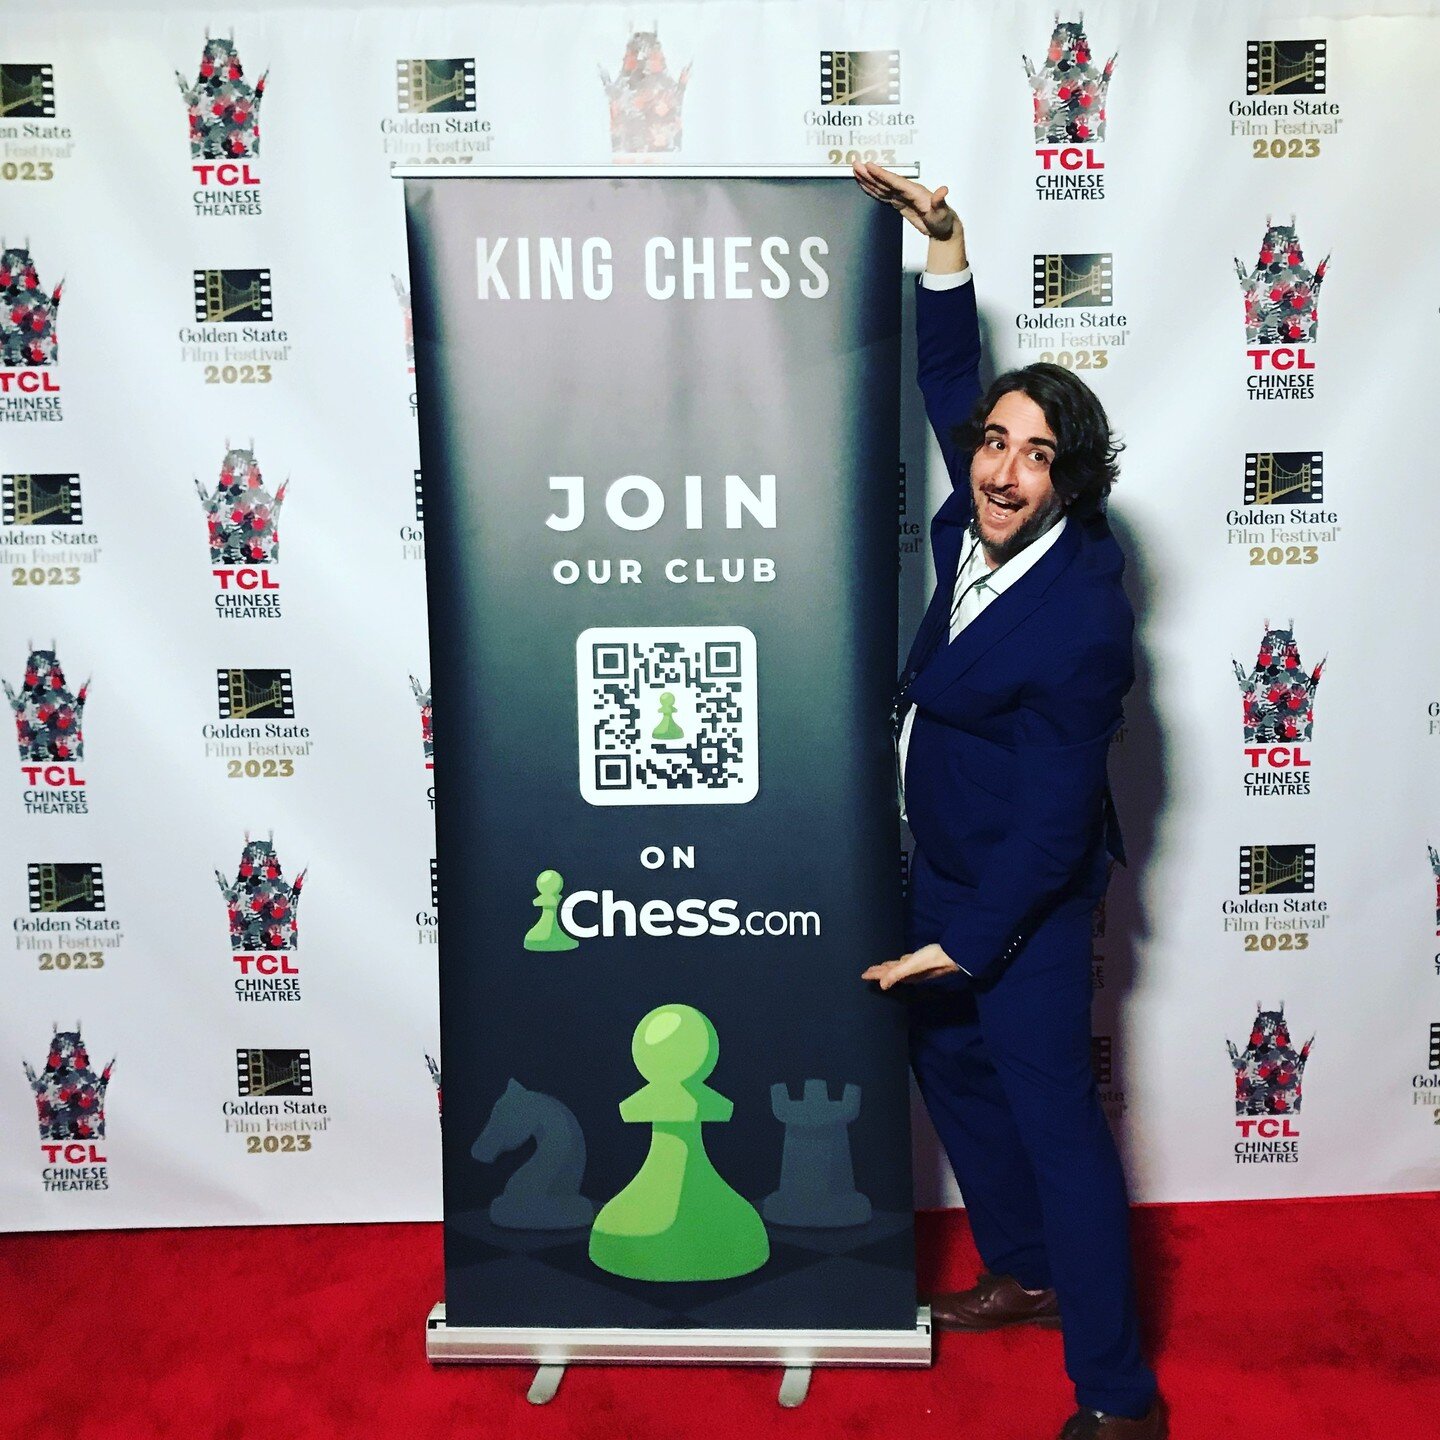 Getting silly on the red carpet at the Premier of King Chess on Hollywood Blvd. Chess.com Certainly has been on the red carpet - BUT HAS THEIR BANNER??? @wwwchesscom #kingchess #chesscom #banner #itsasign